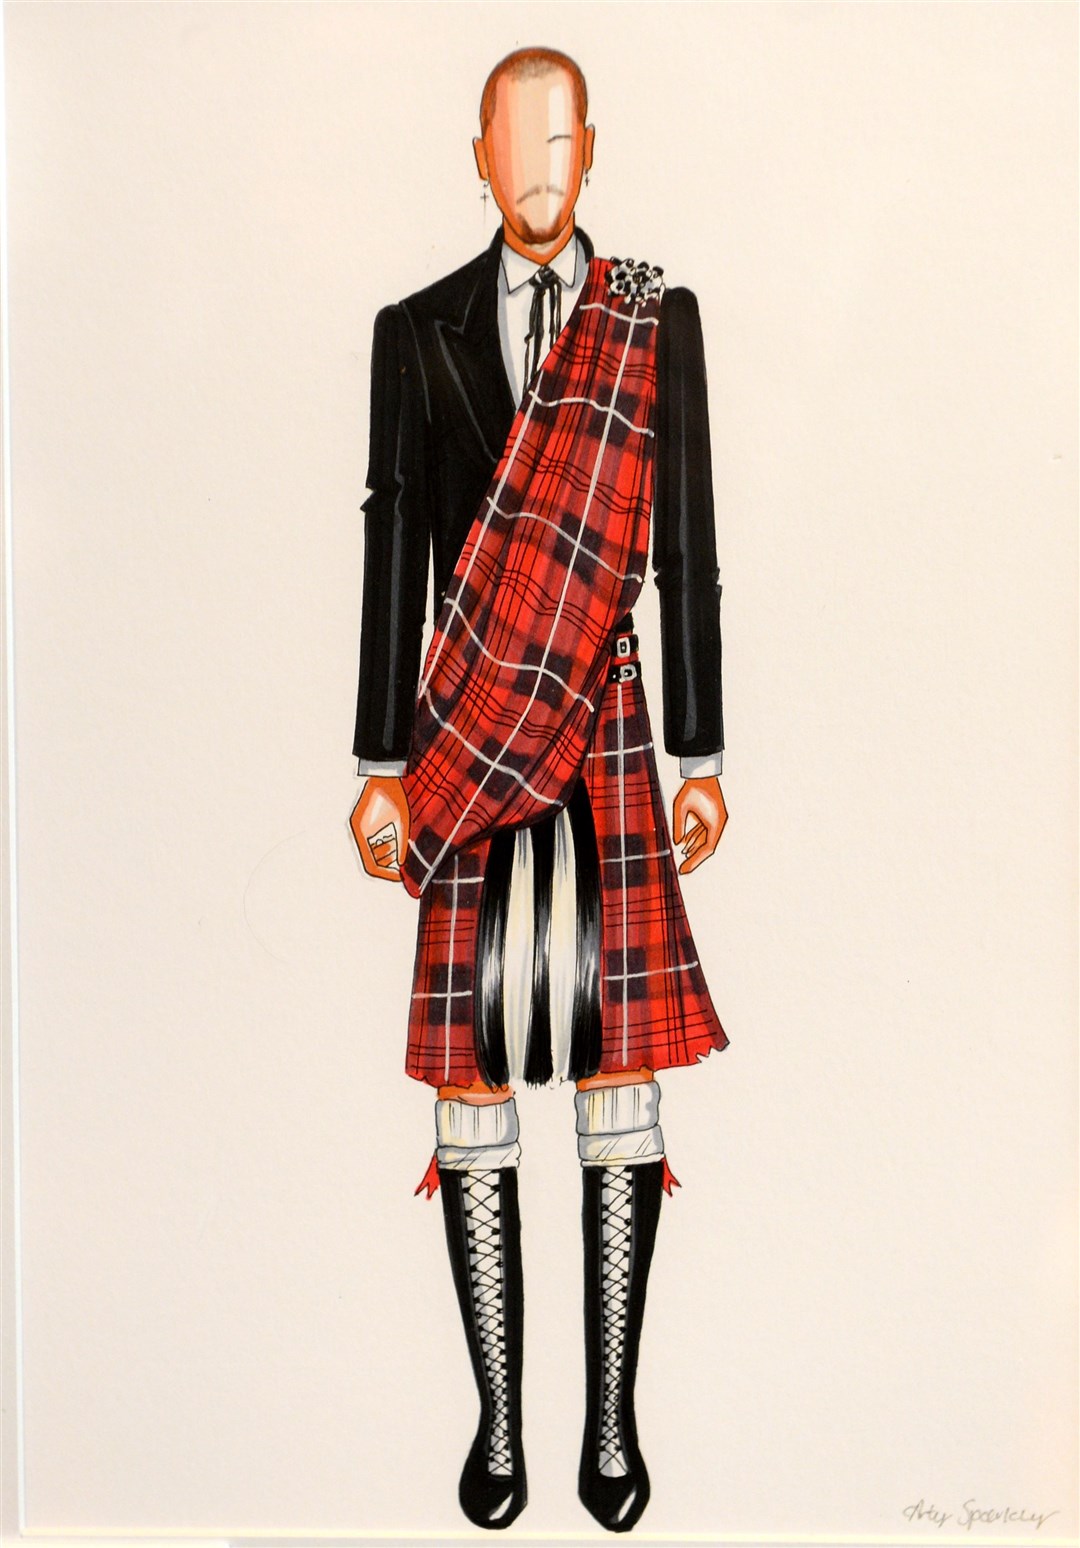 'Alexander McQueen' by Arty Sparkly Illustrations. Pictures: Gary Anthony